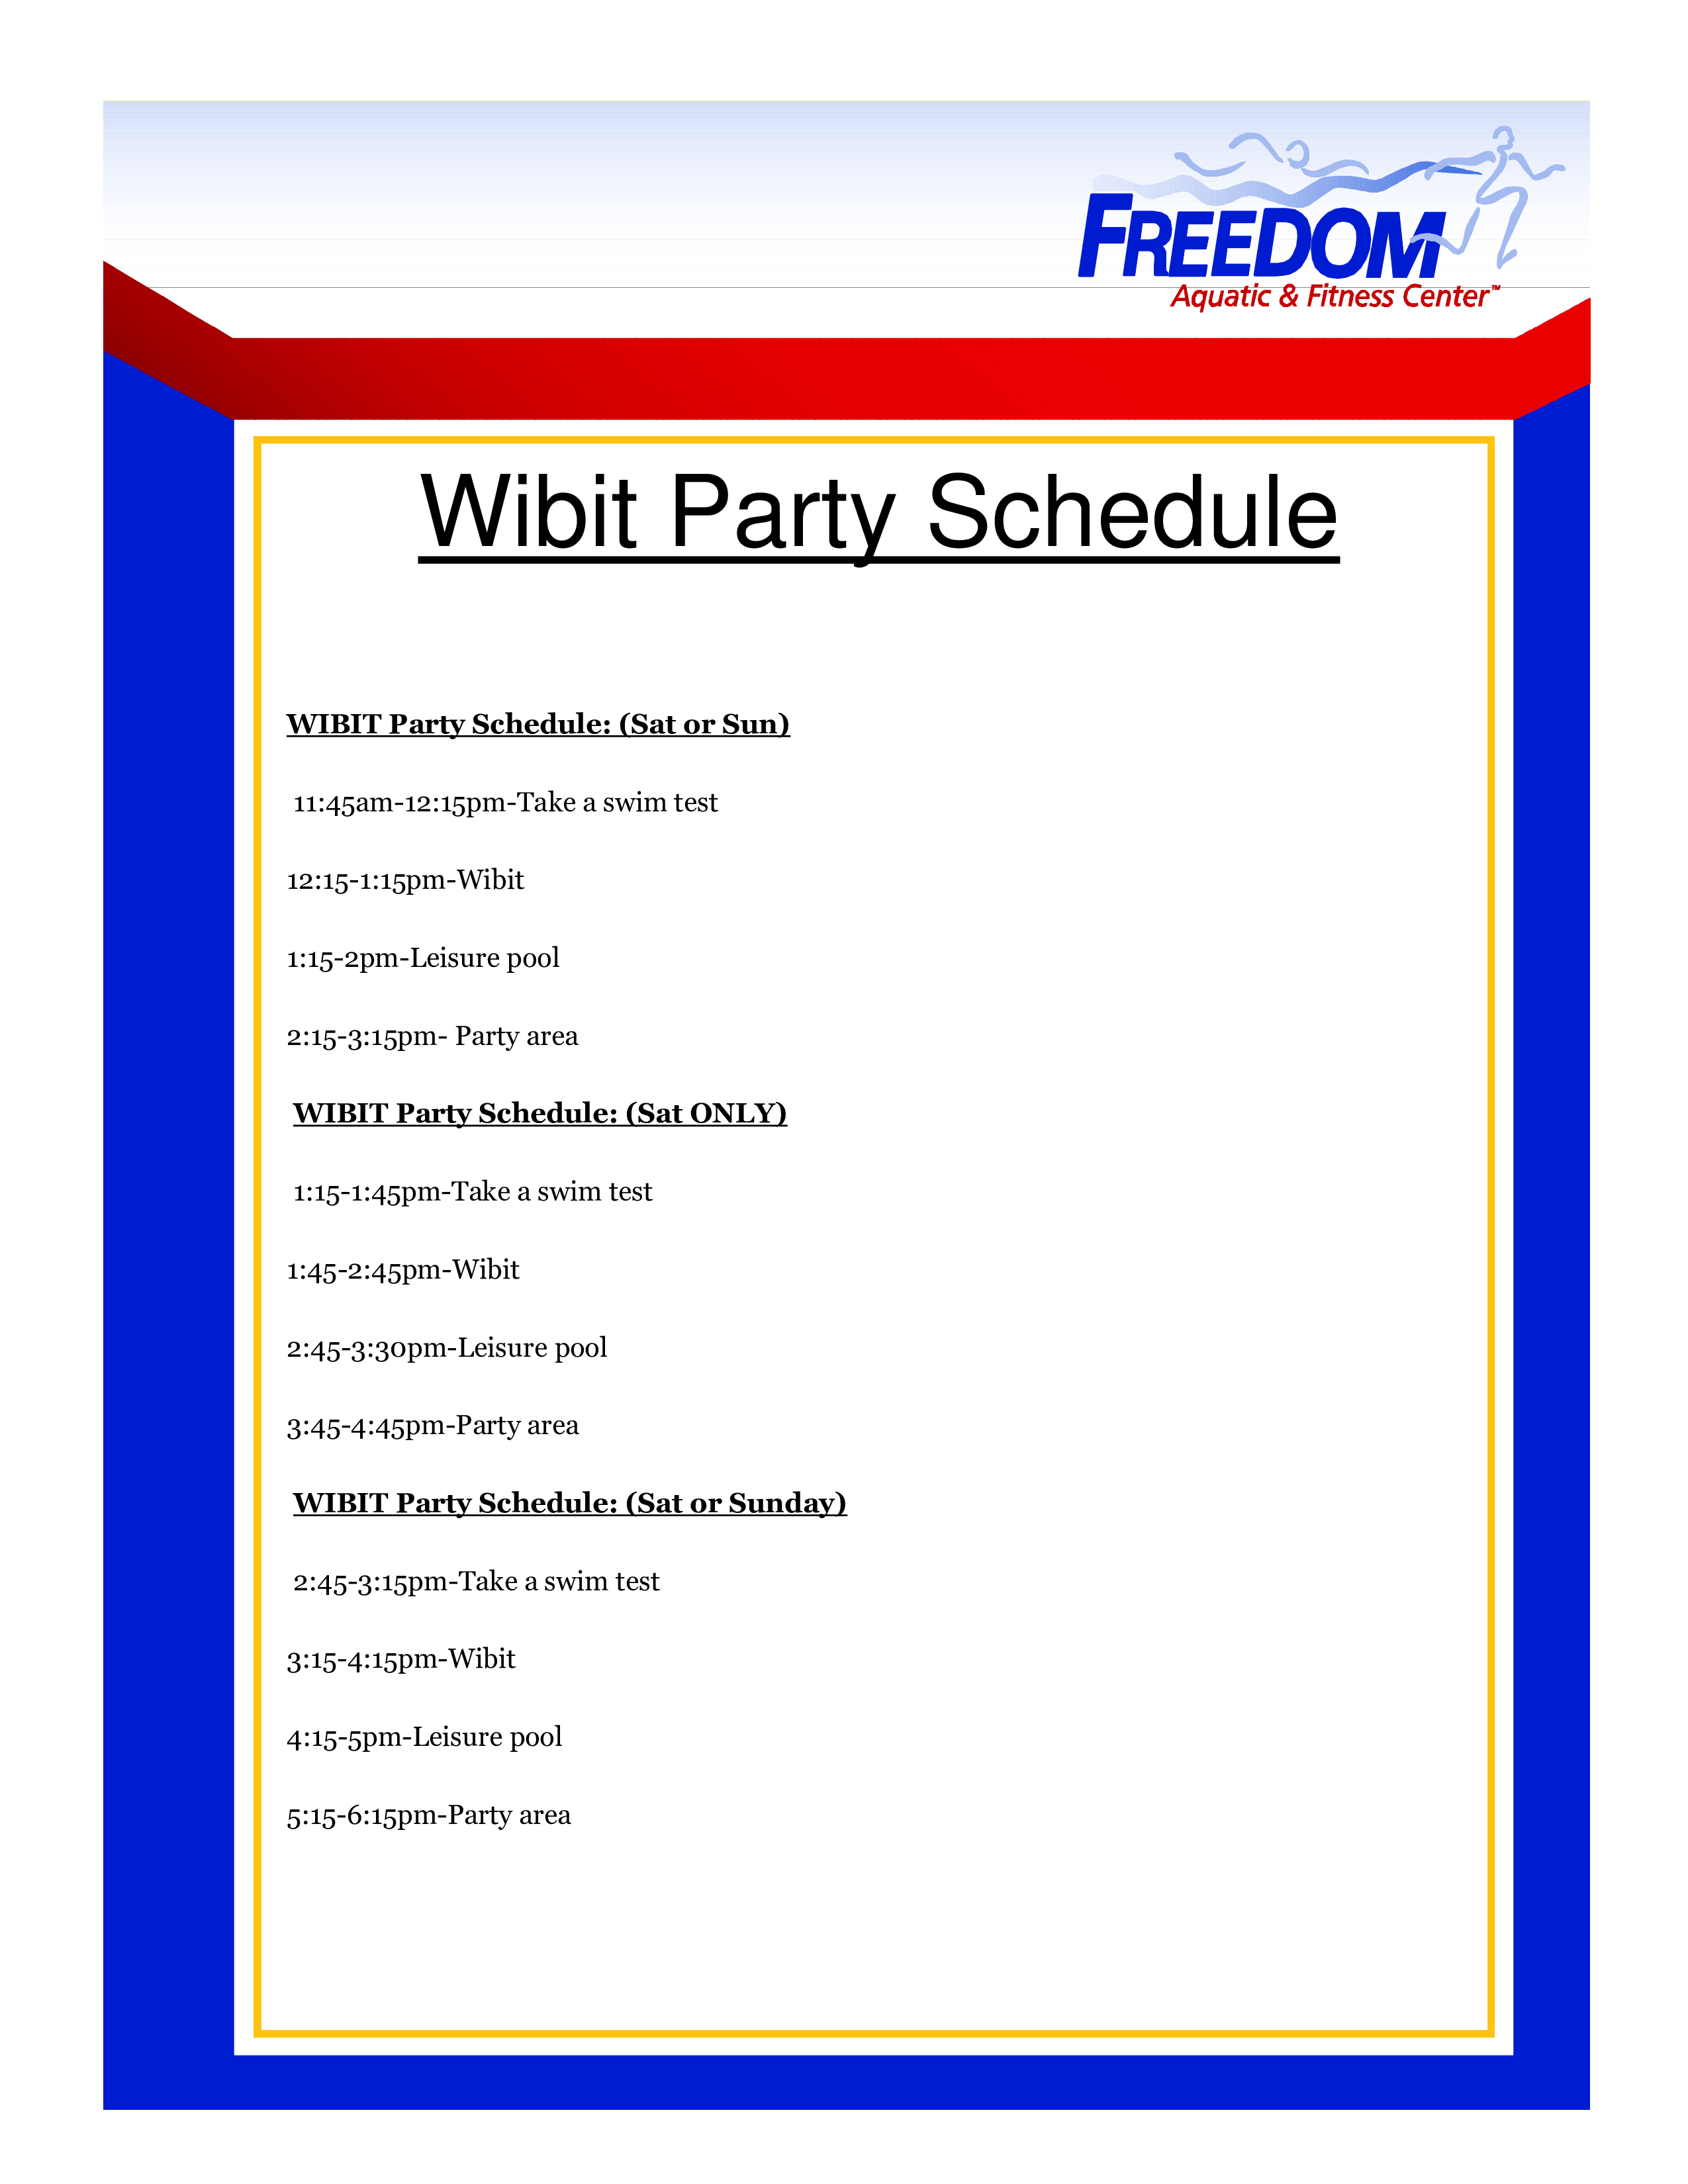 Party Schedule main image